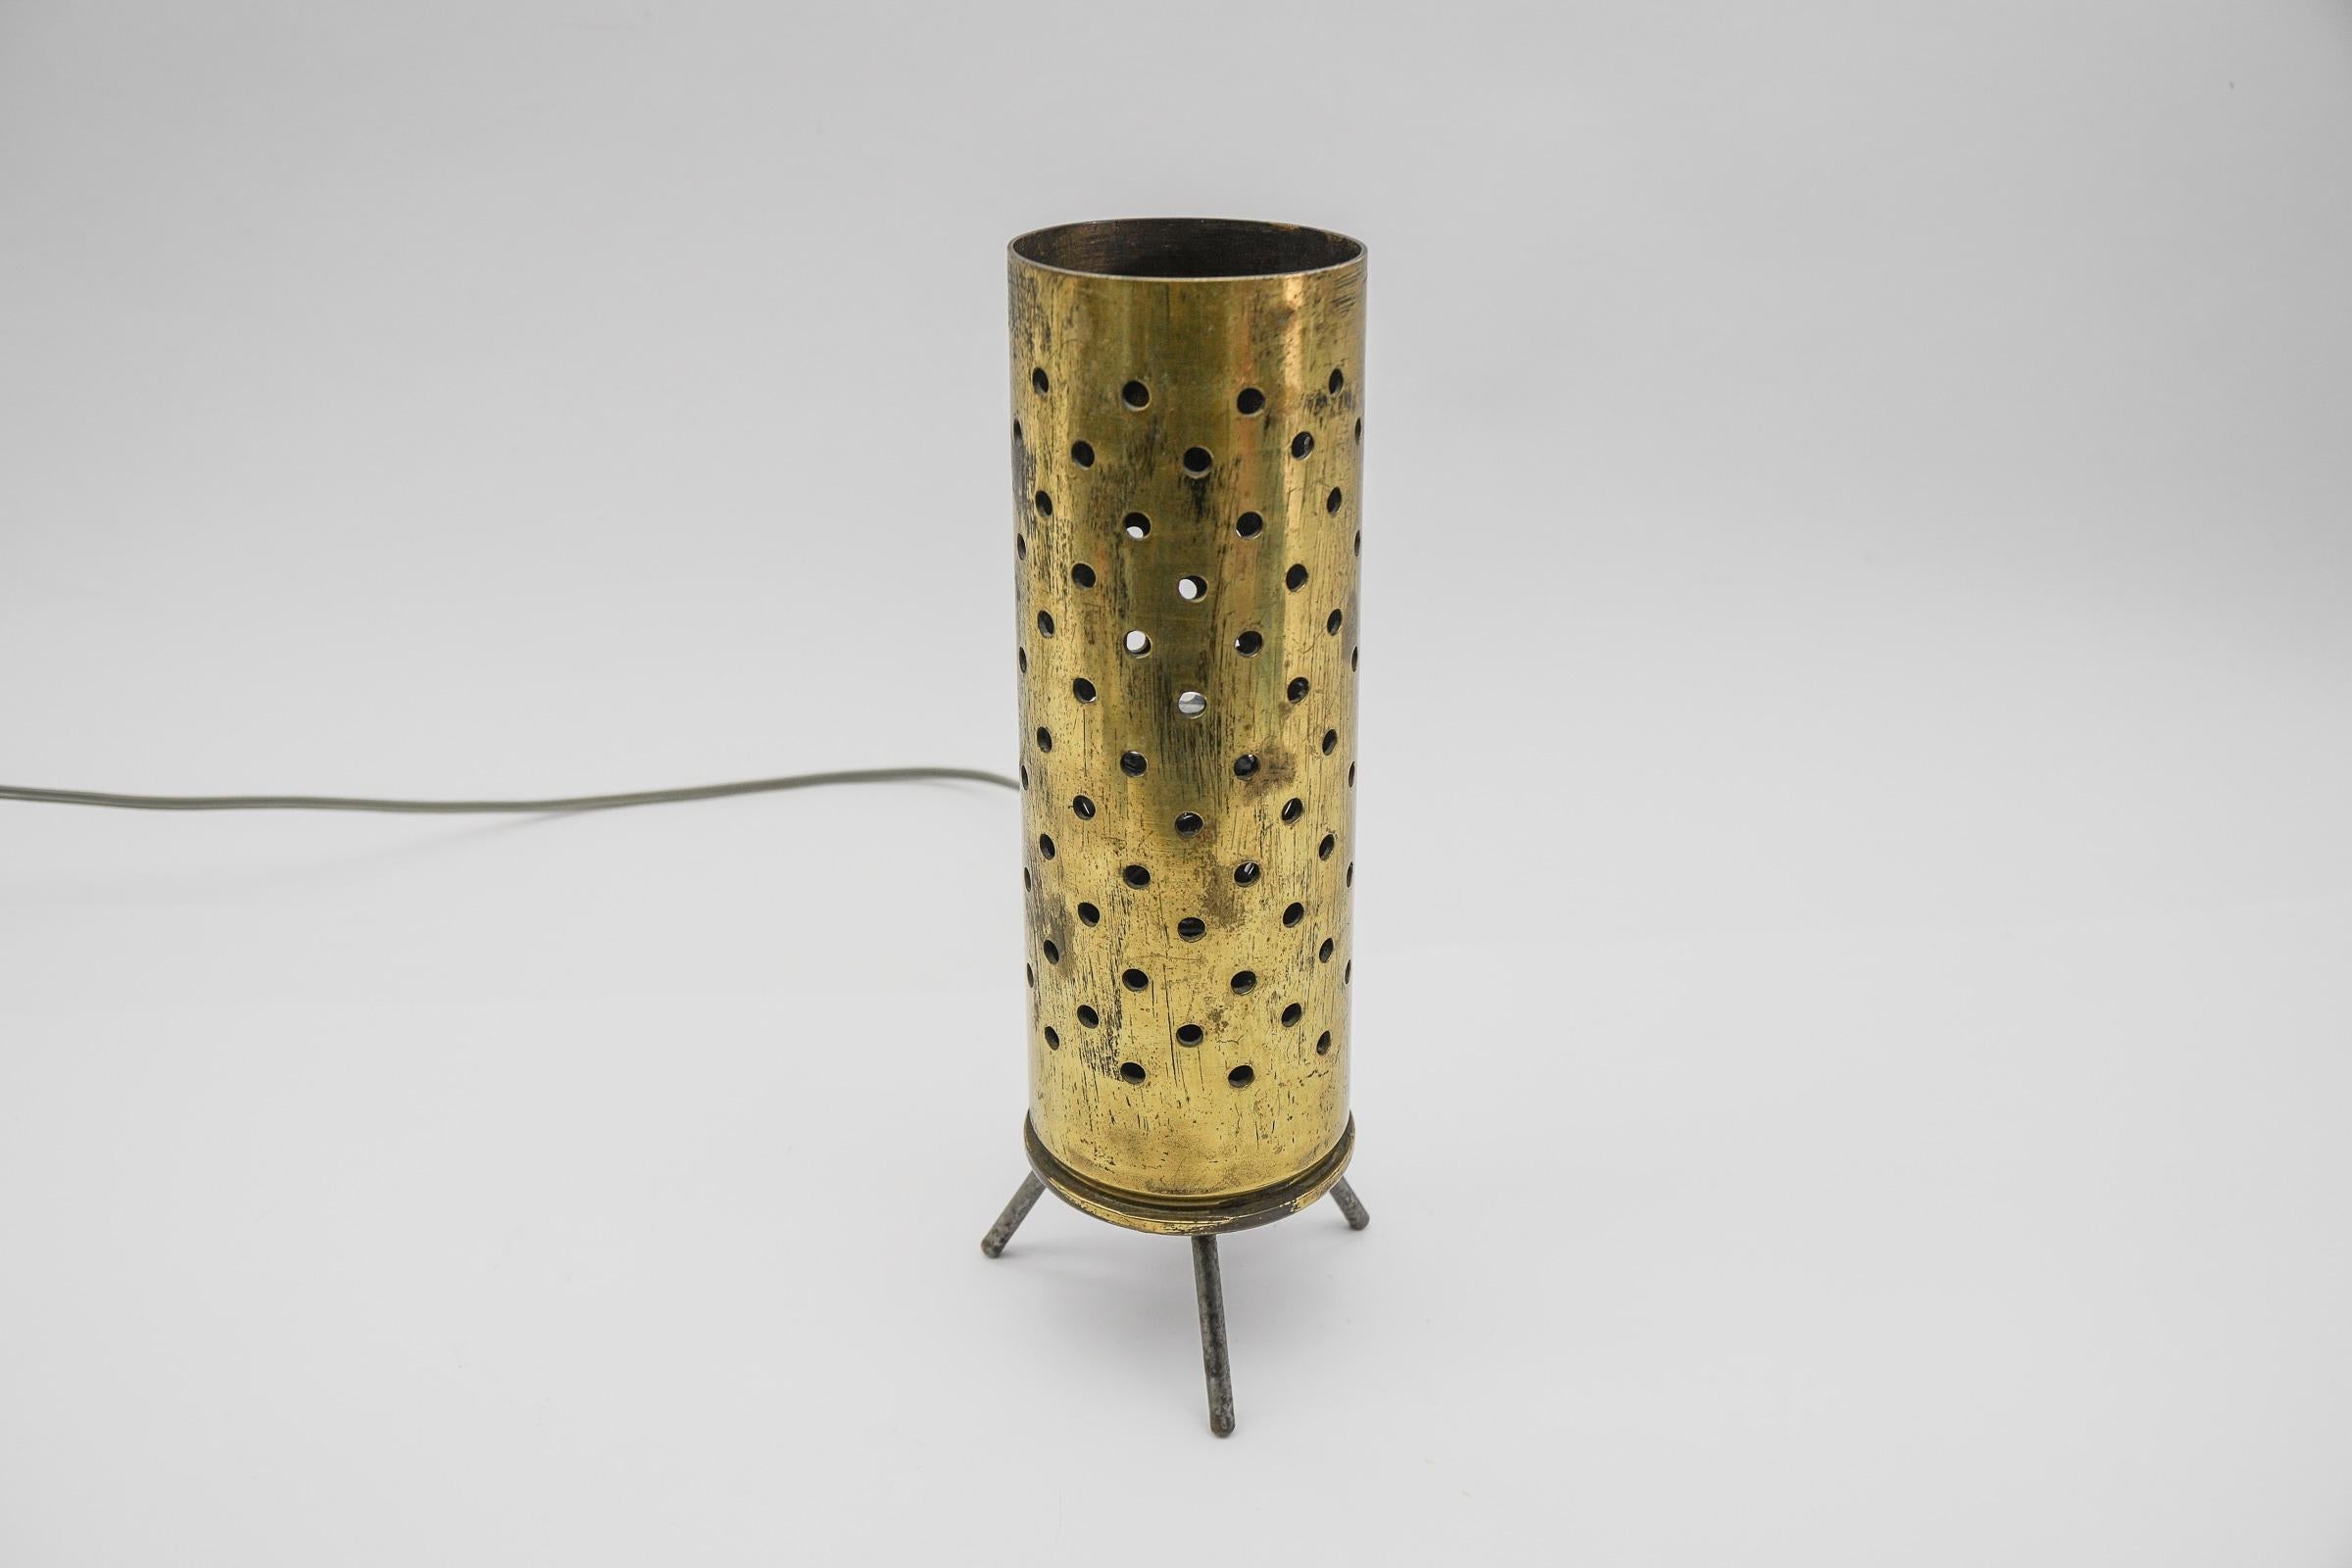 50s Tripod Table Lamp Made of Perforated Cartridge Case, Germany In Good Condition For Sale In Nürnberg, Bayern